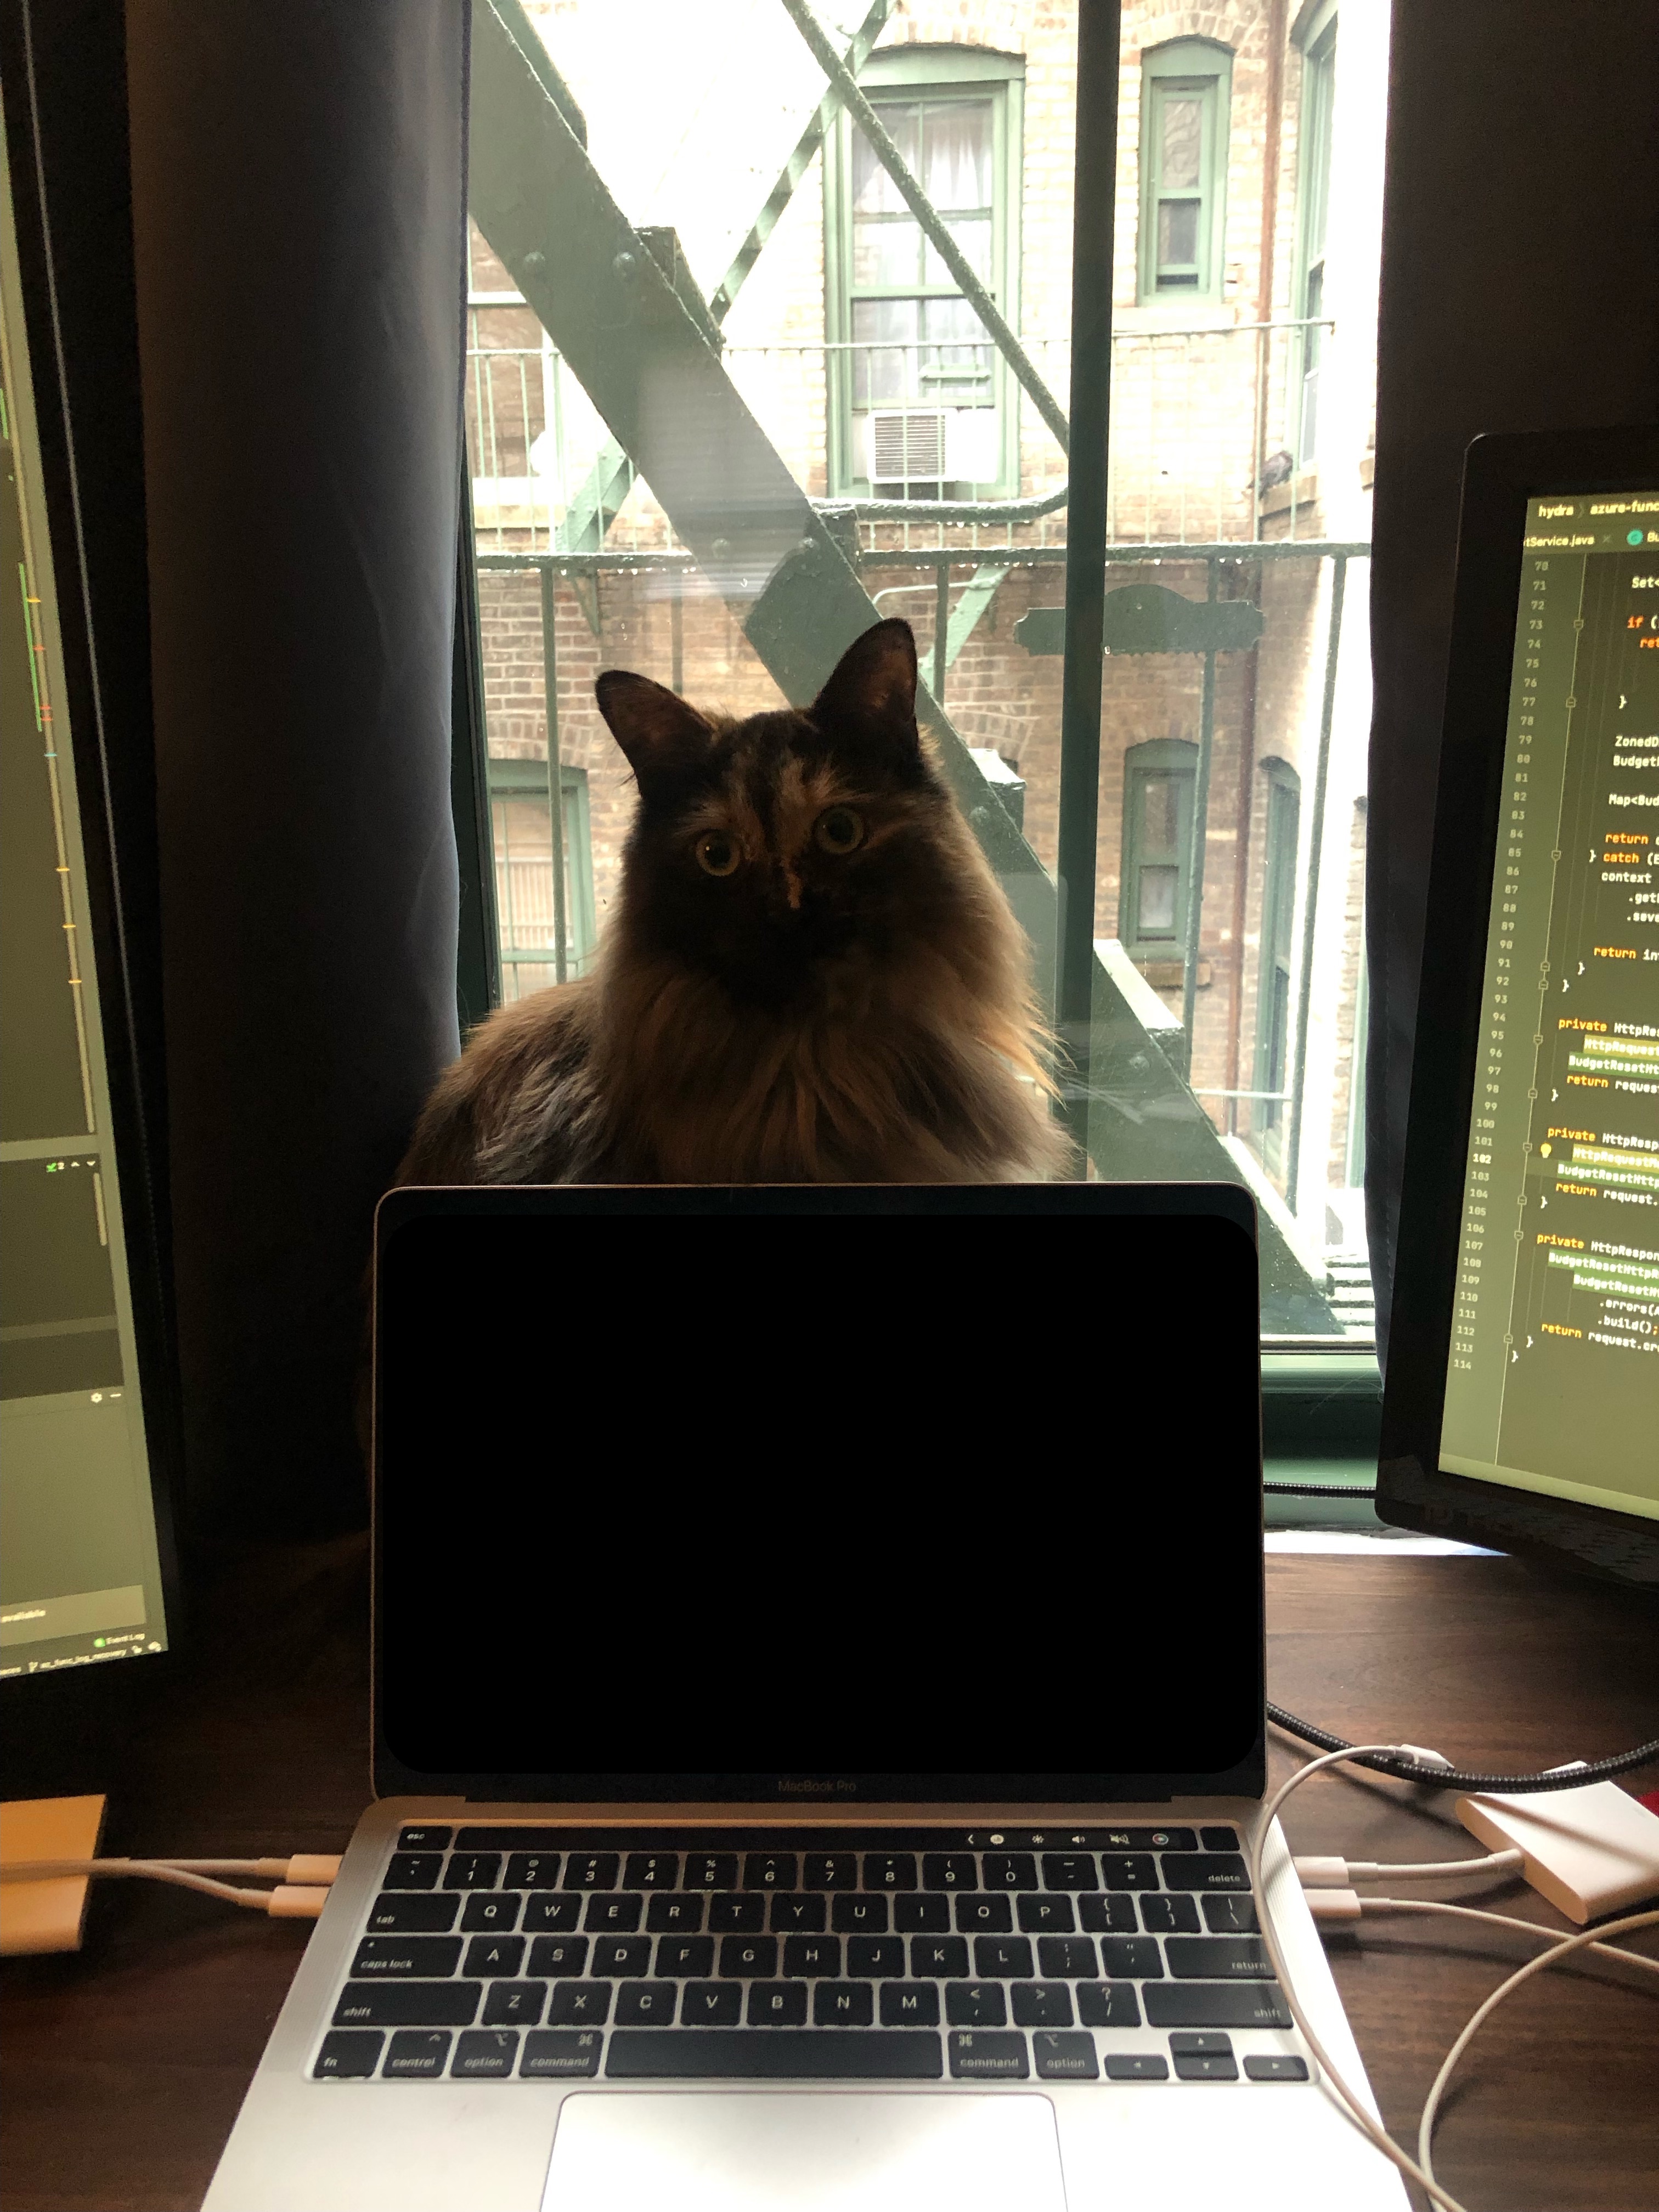 A picture of a laptop with black/brown/gray domestic long-haired cat sitting expectedly behind it.